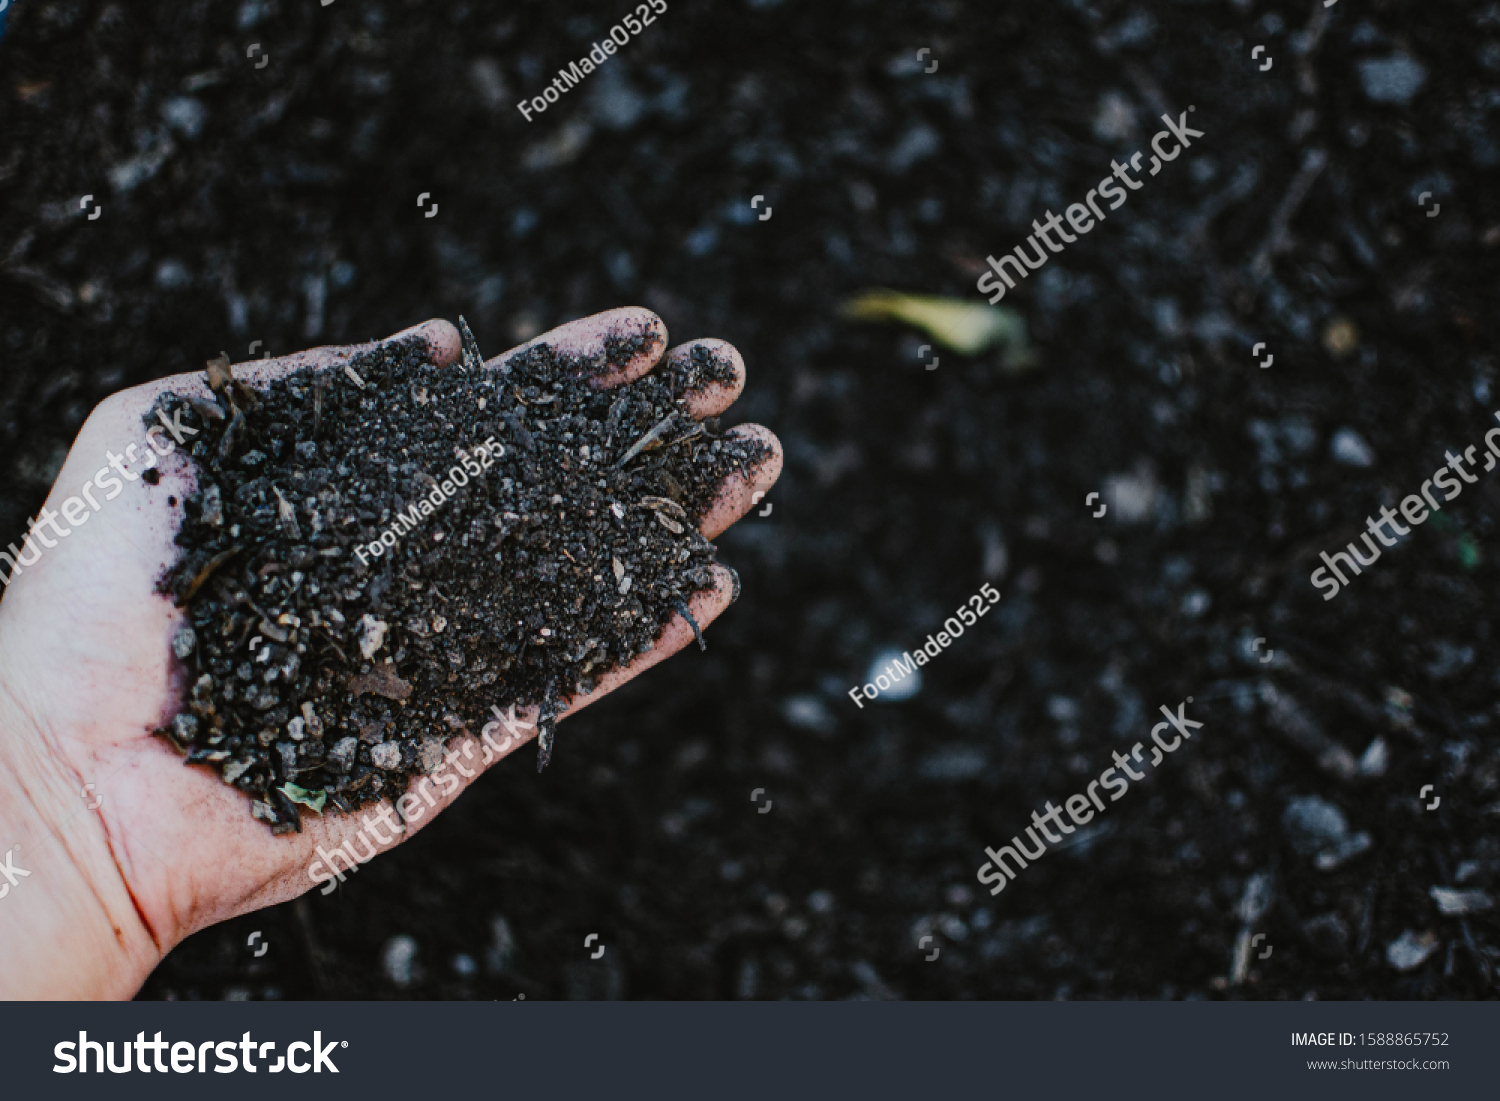 Farmer hands holding soil or organic fertilizer. Organic fertilizer for organic fruits and vegetables. Symbol of agriculture and ecology concept. #1588865752